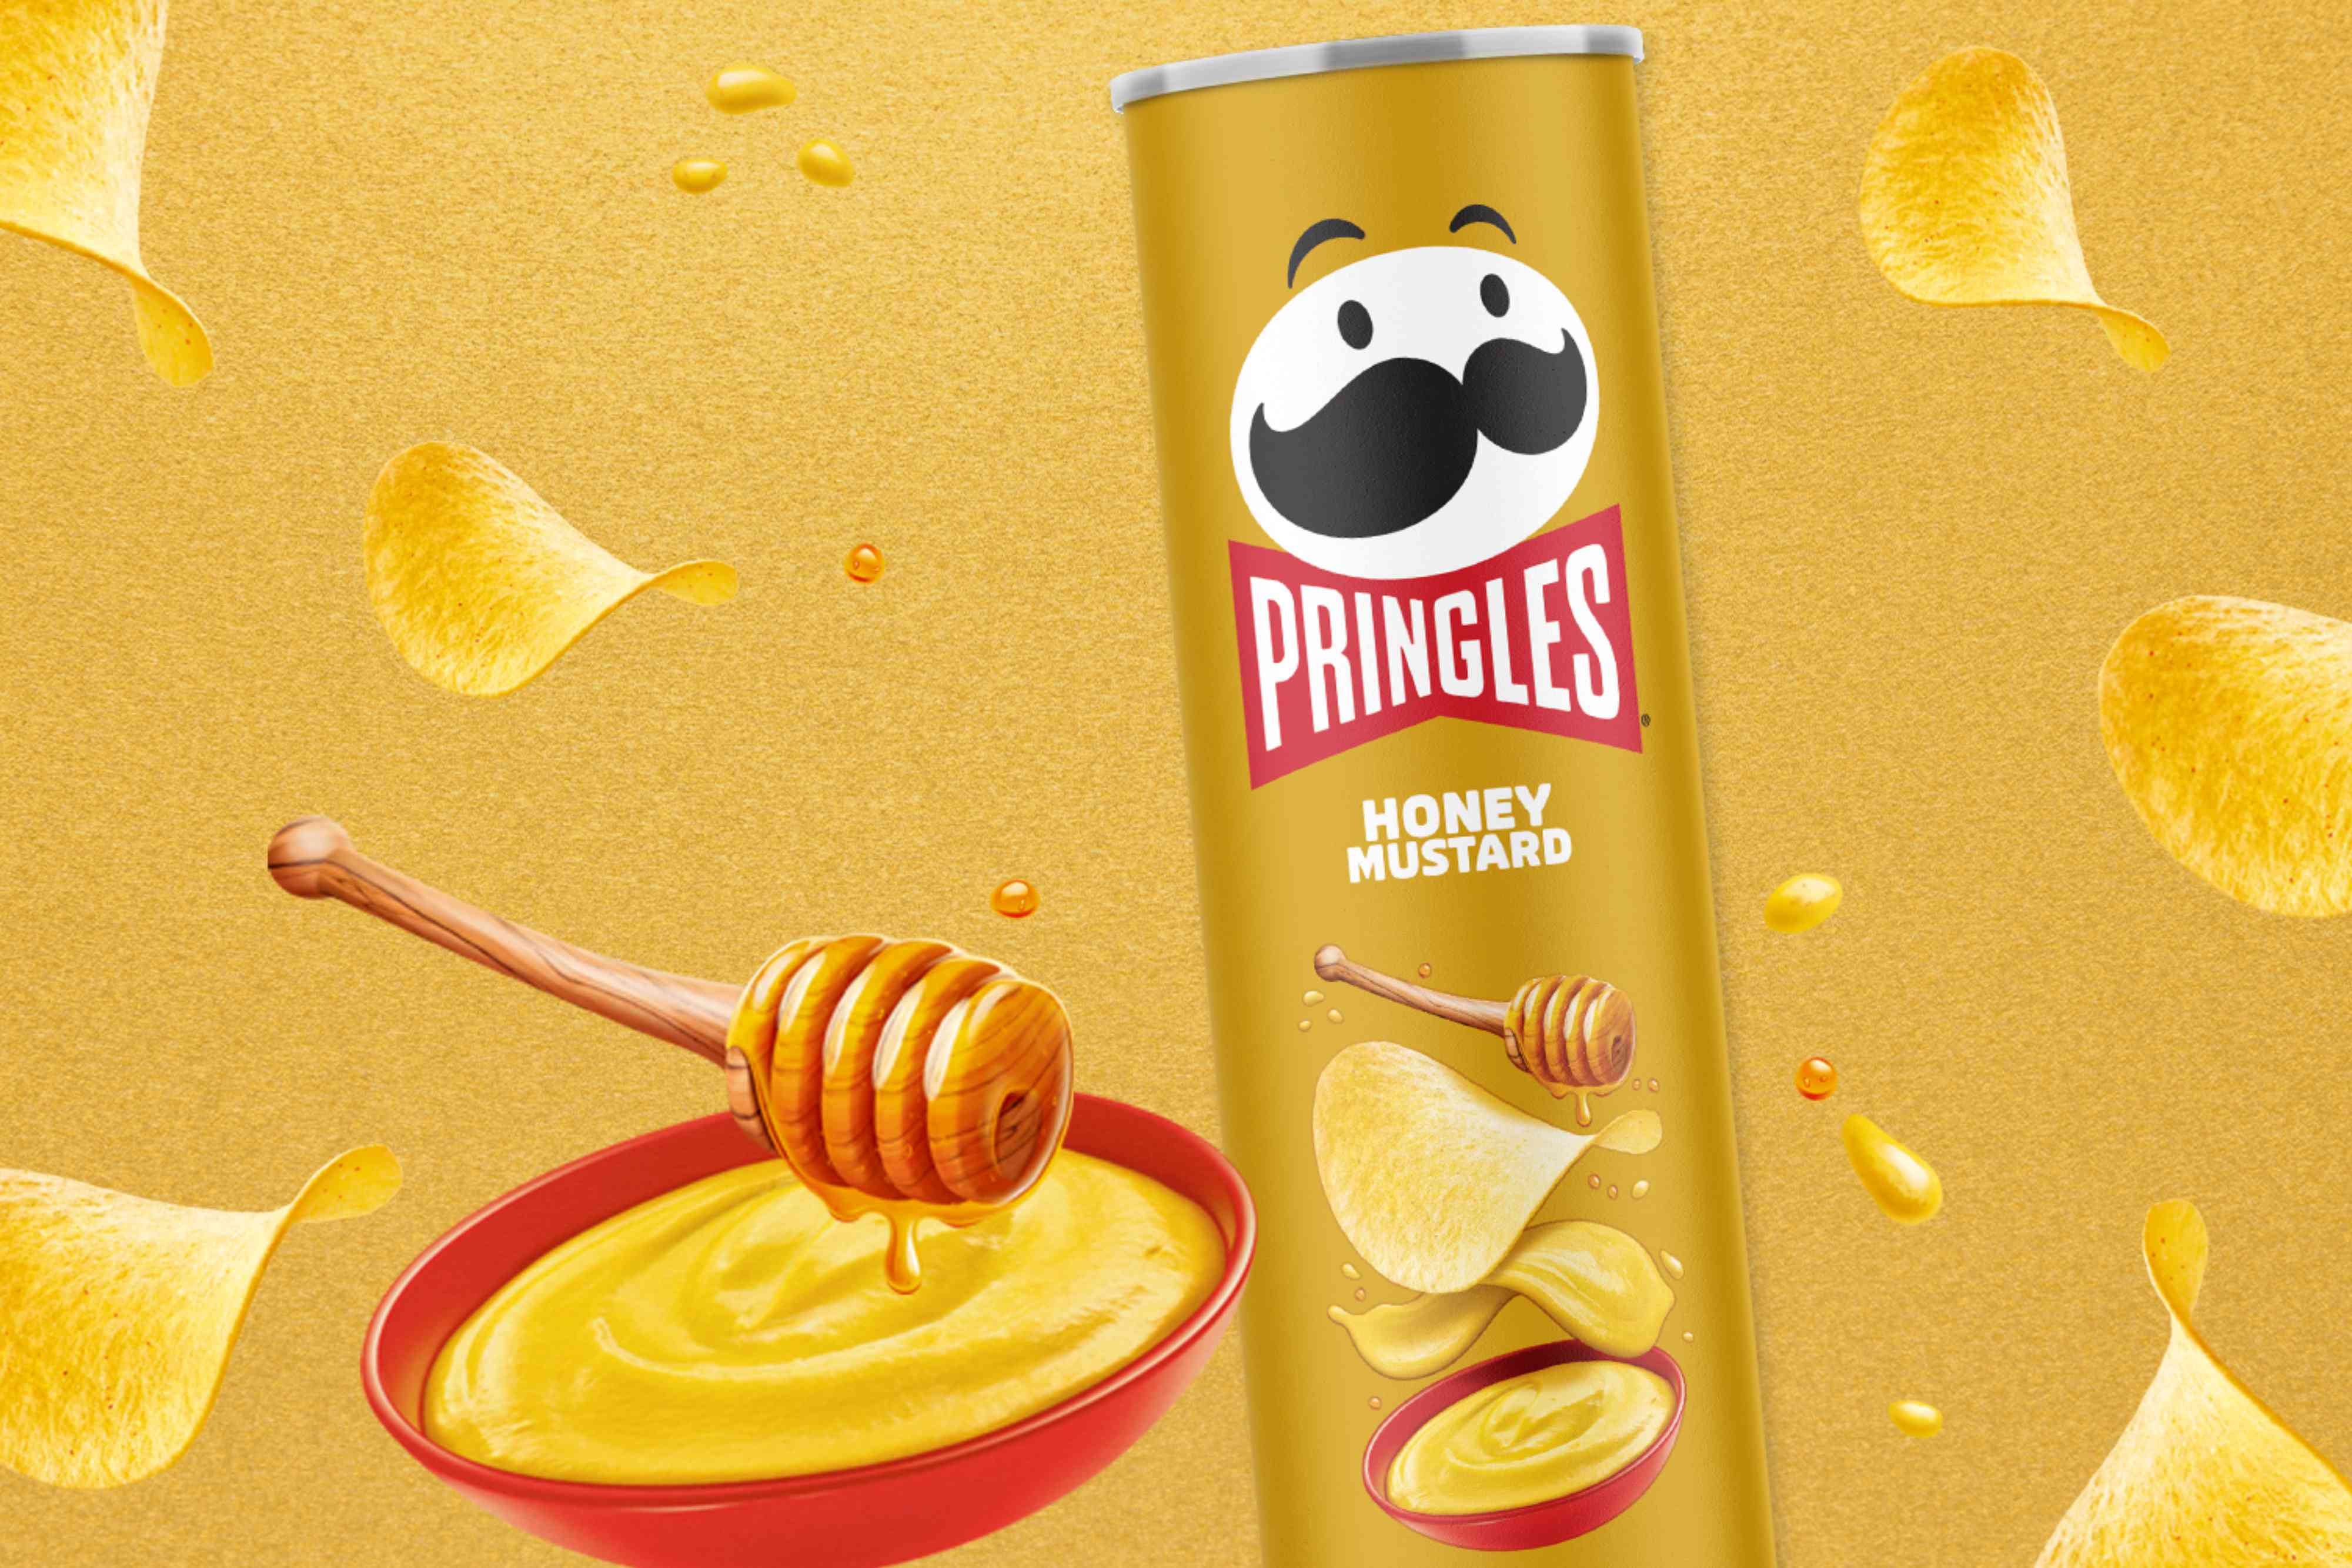 pringles is bringing back its most requested flavor